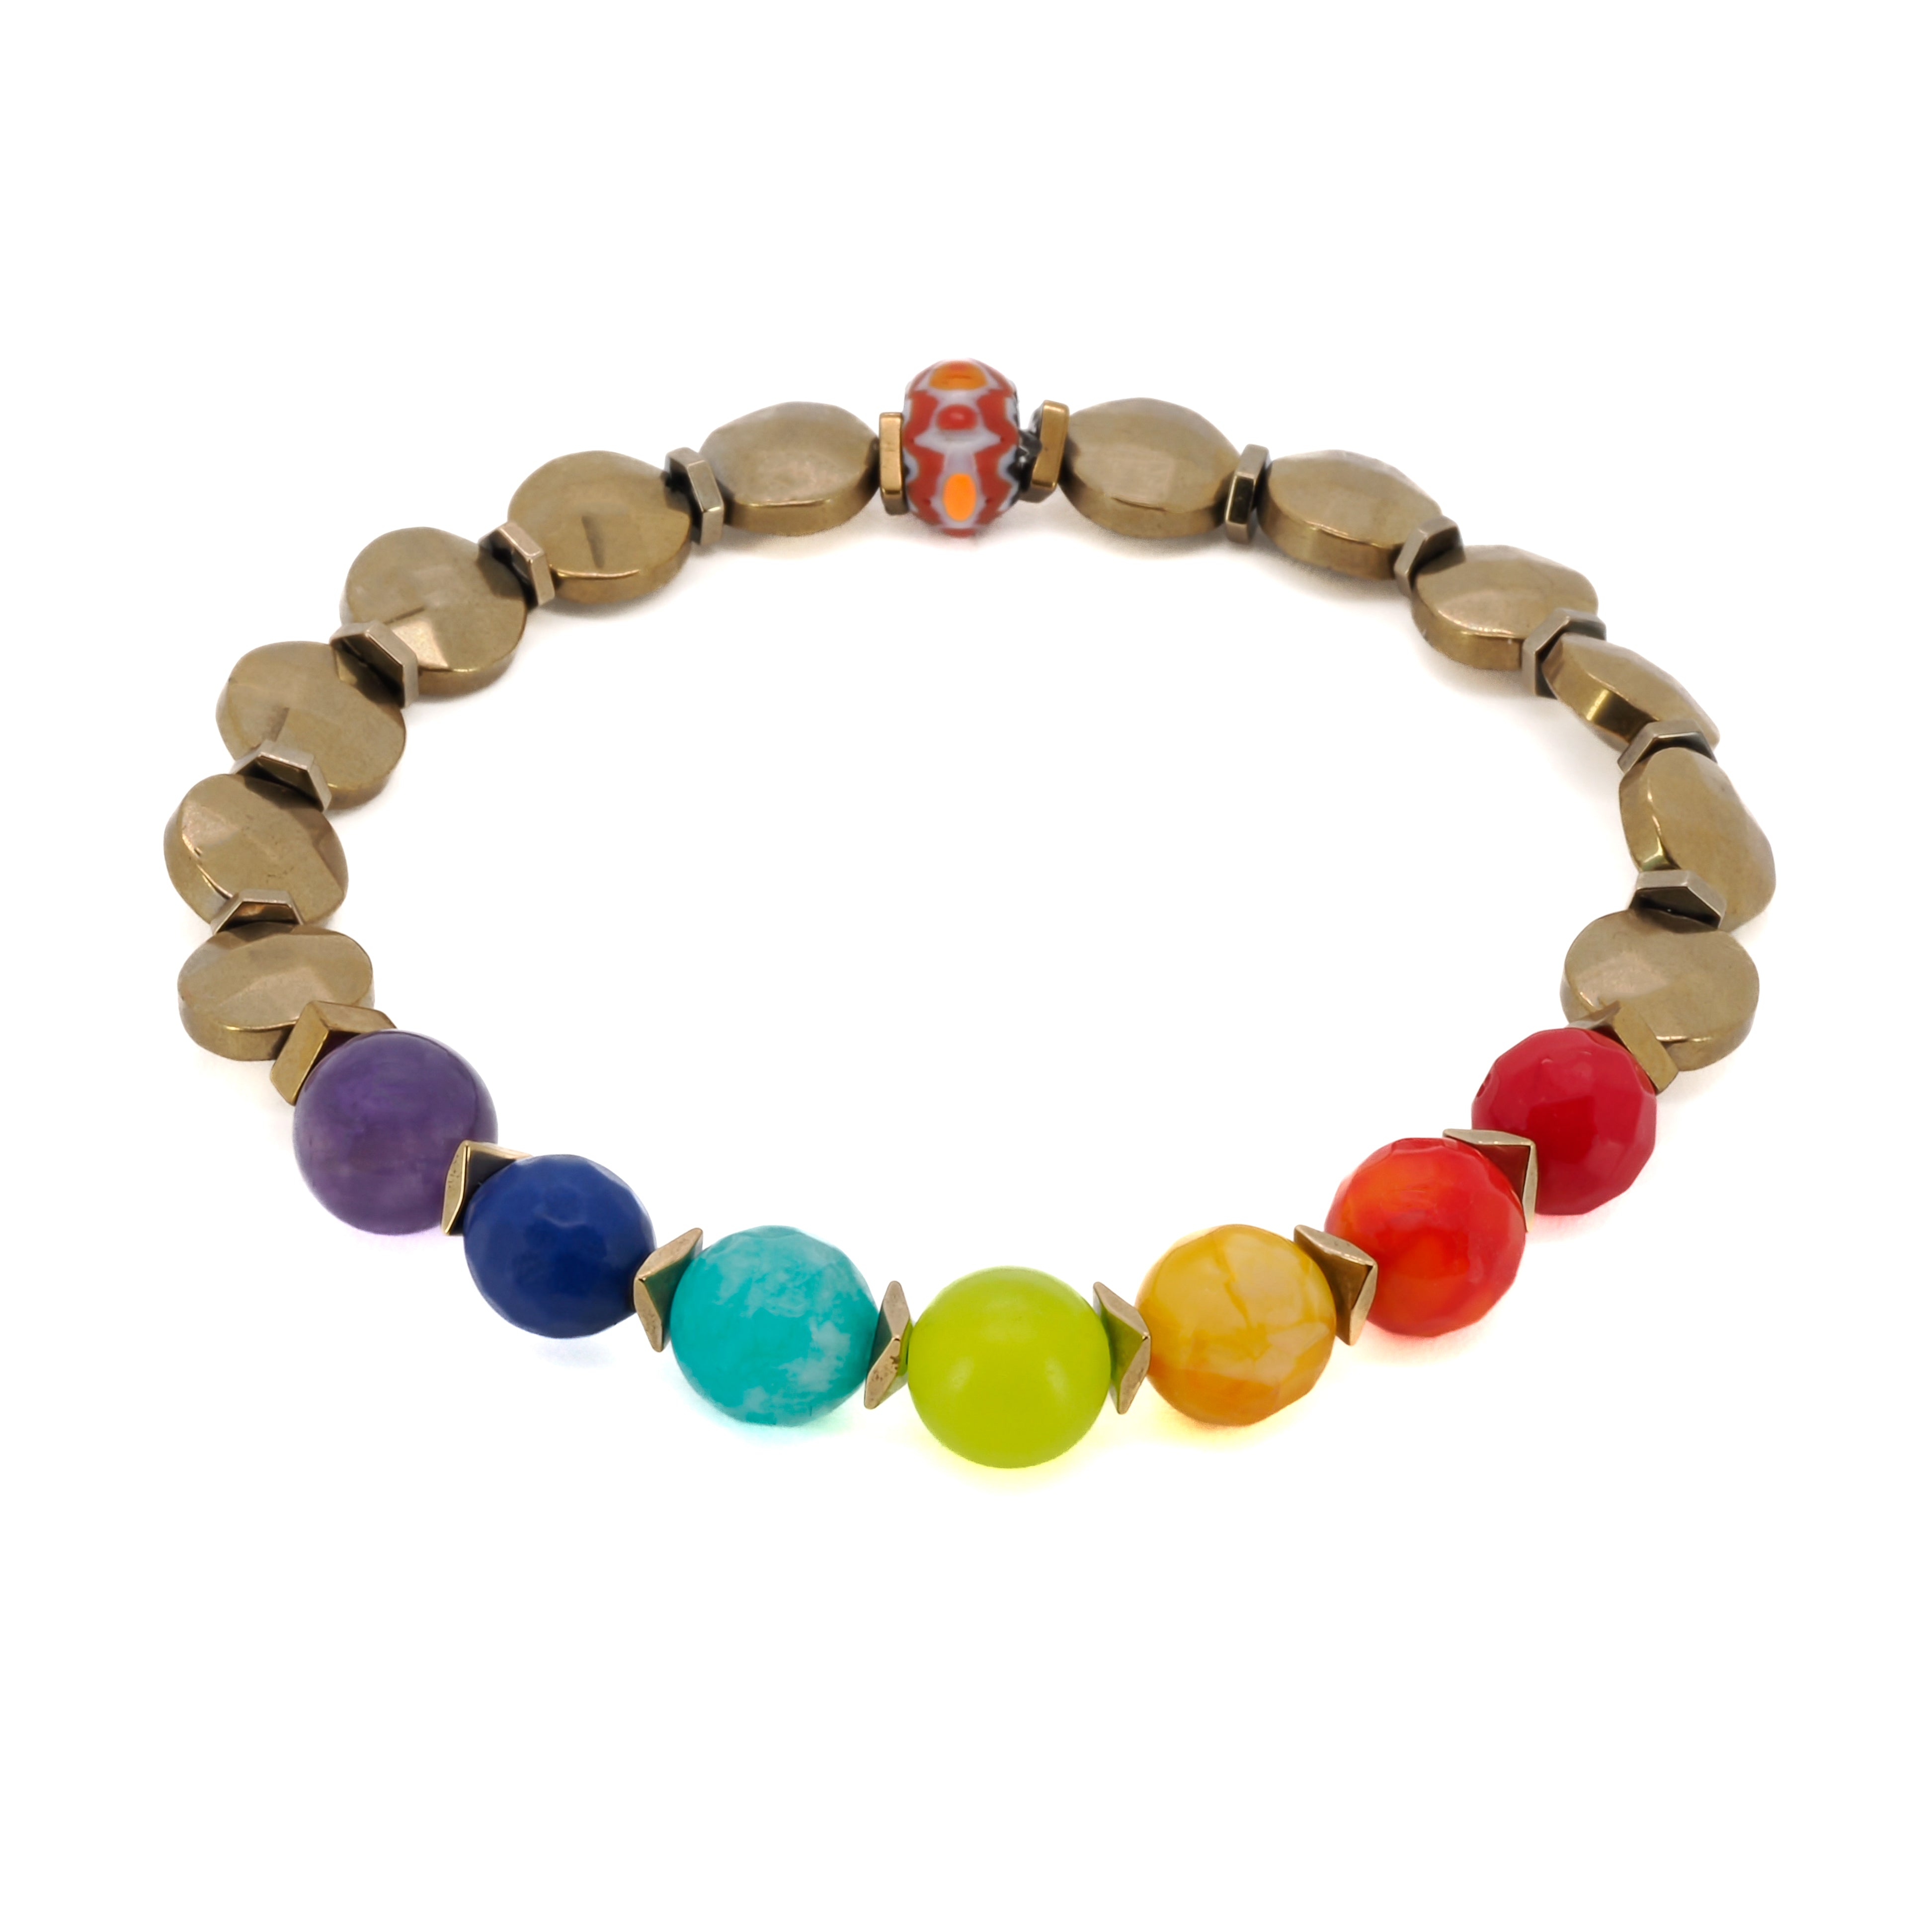 Chakra Balance Bracelet with Natural Stone Beads, a harmonious and energizing accessory that promotes balance and well-being.